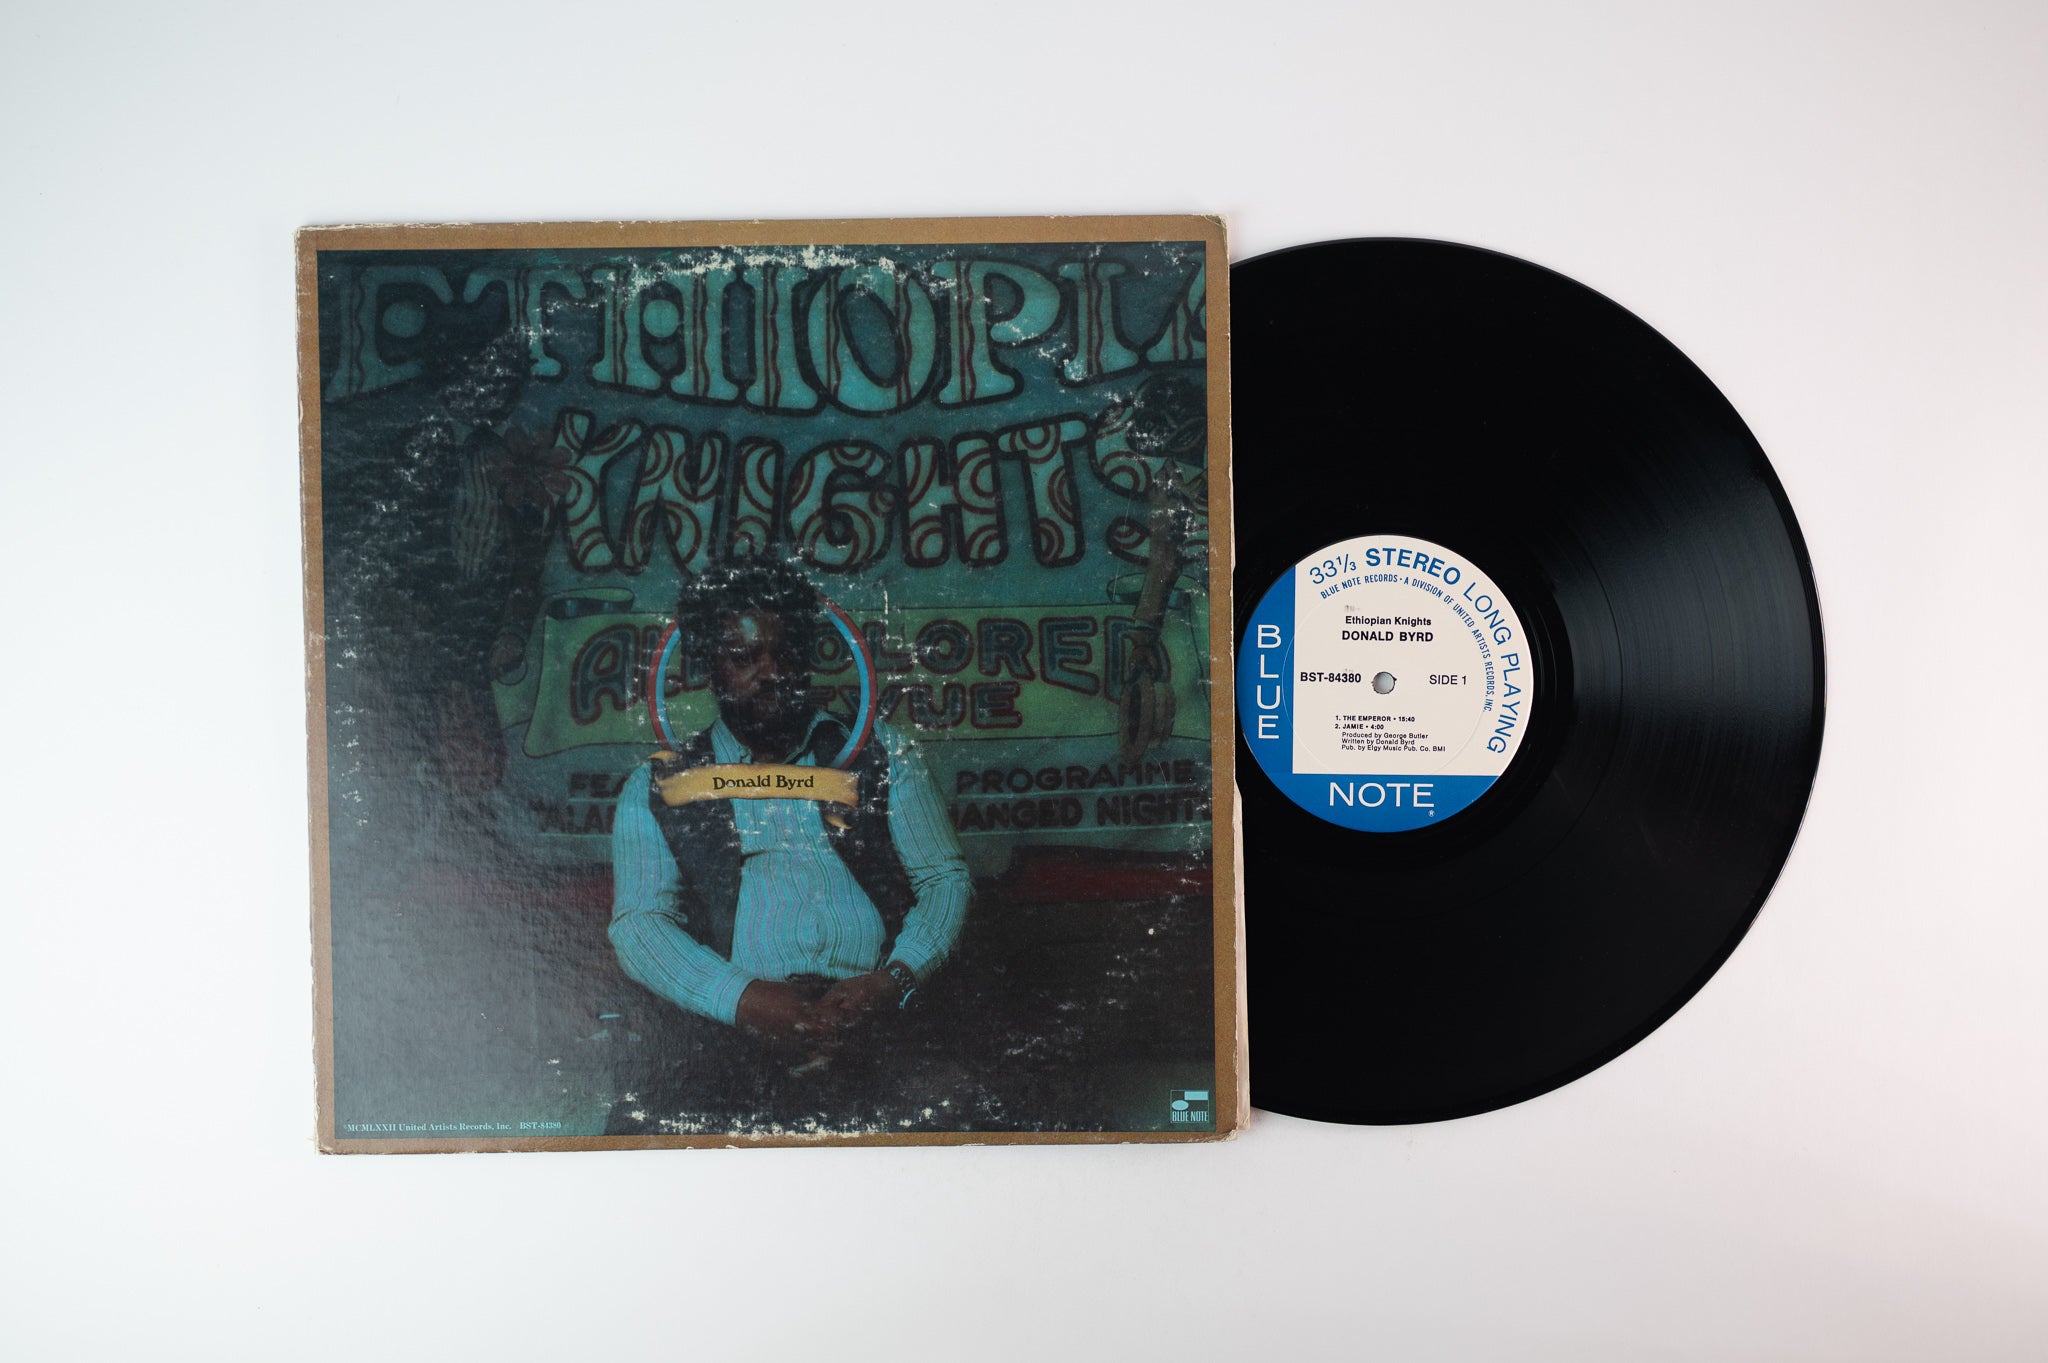 Donald Byrd - Ethiopian Knights on Blue Note 84380 United Artists